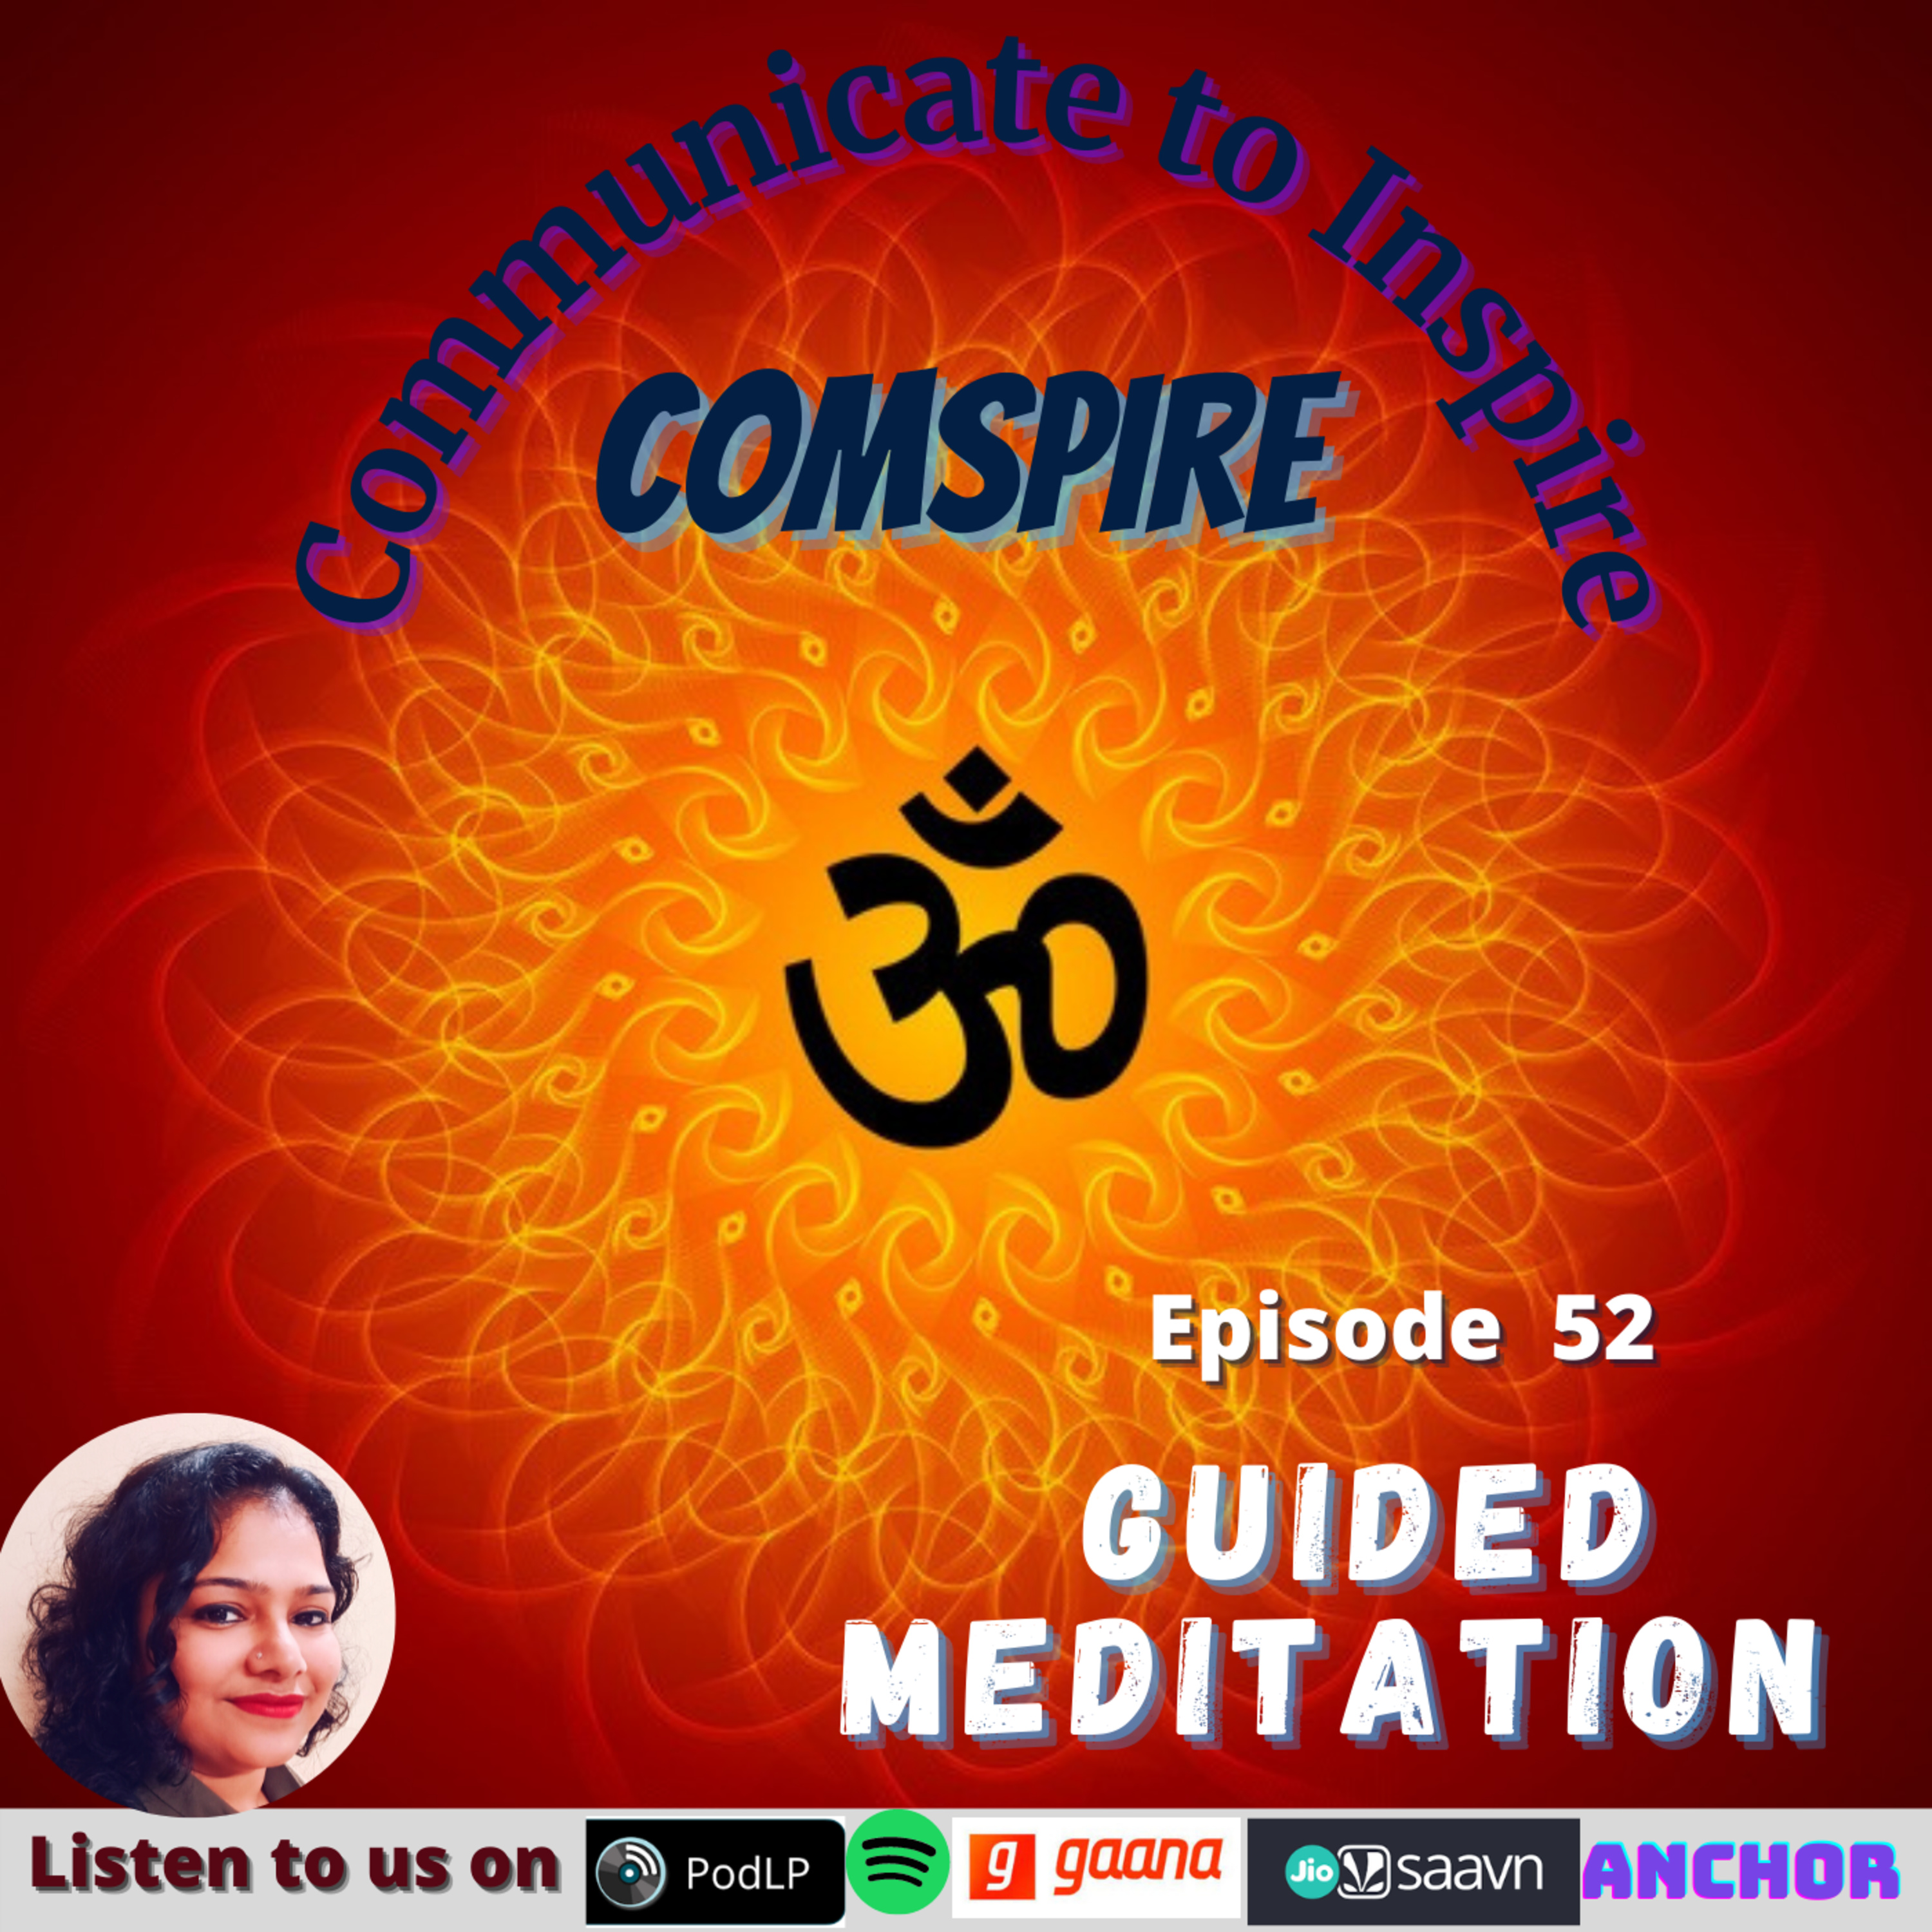 Episode 52 Complete Guided Meditation with Om Chanting